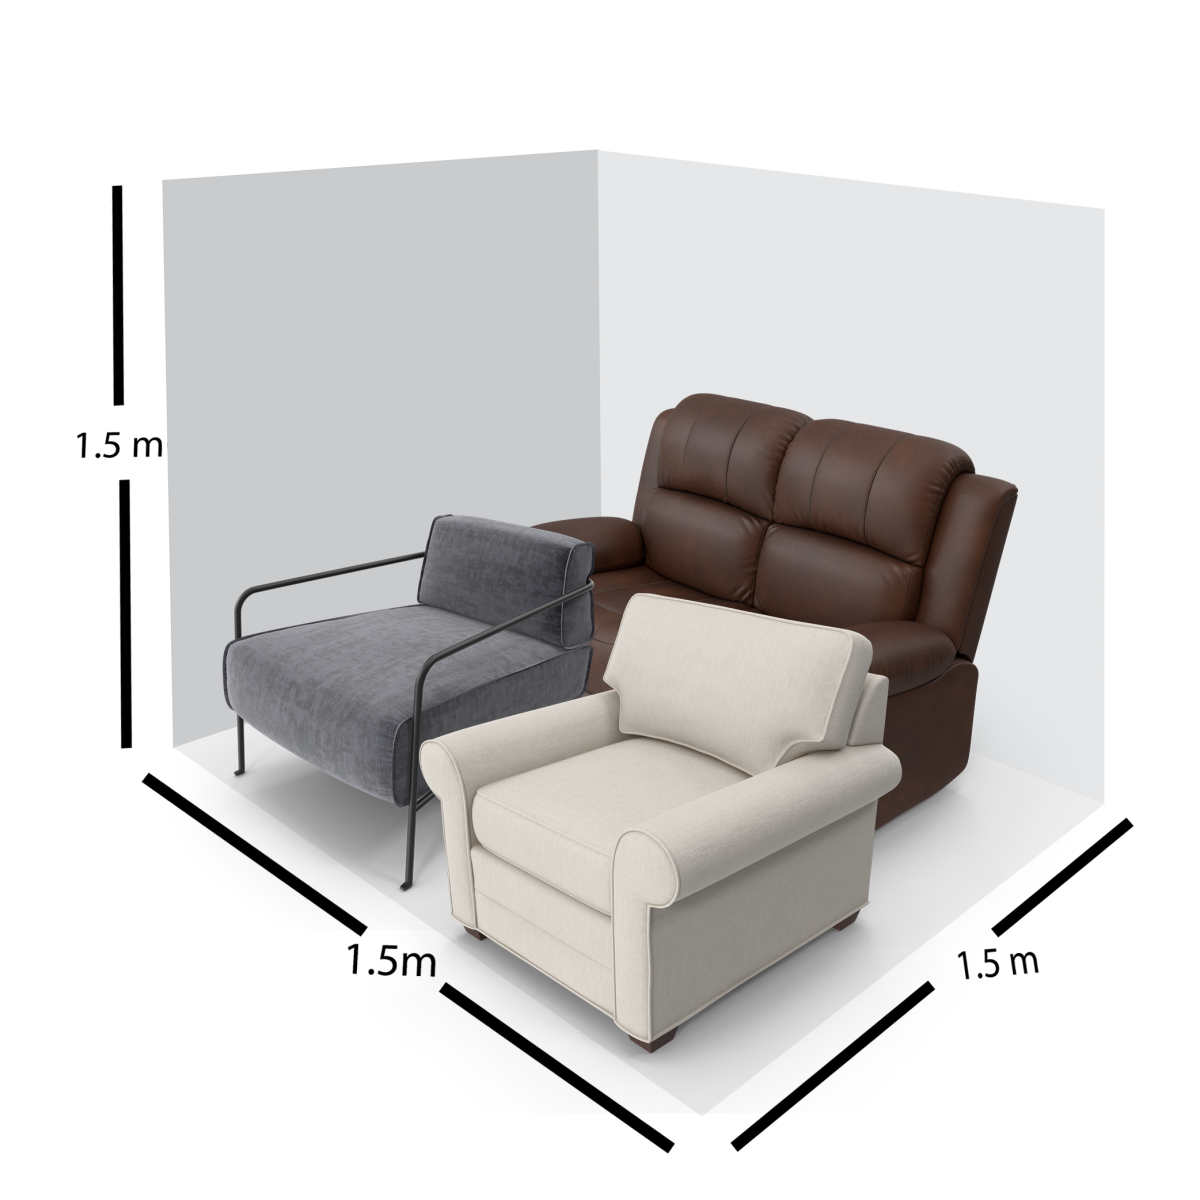 grey, white and brown sofas